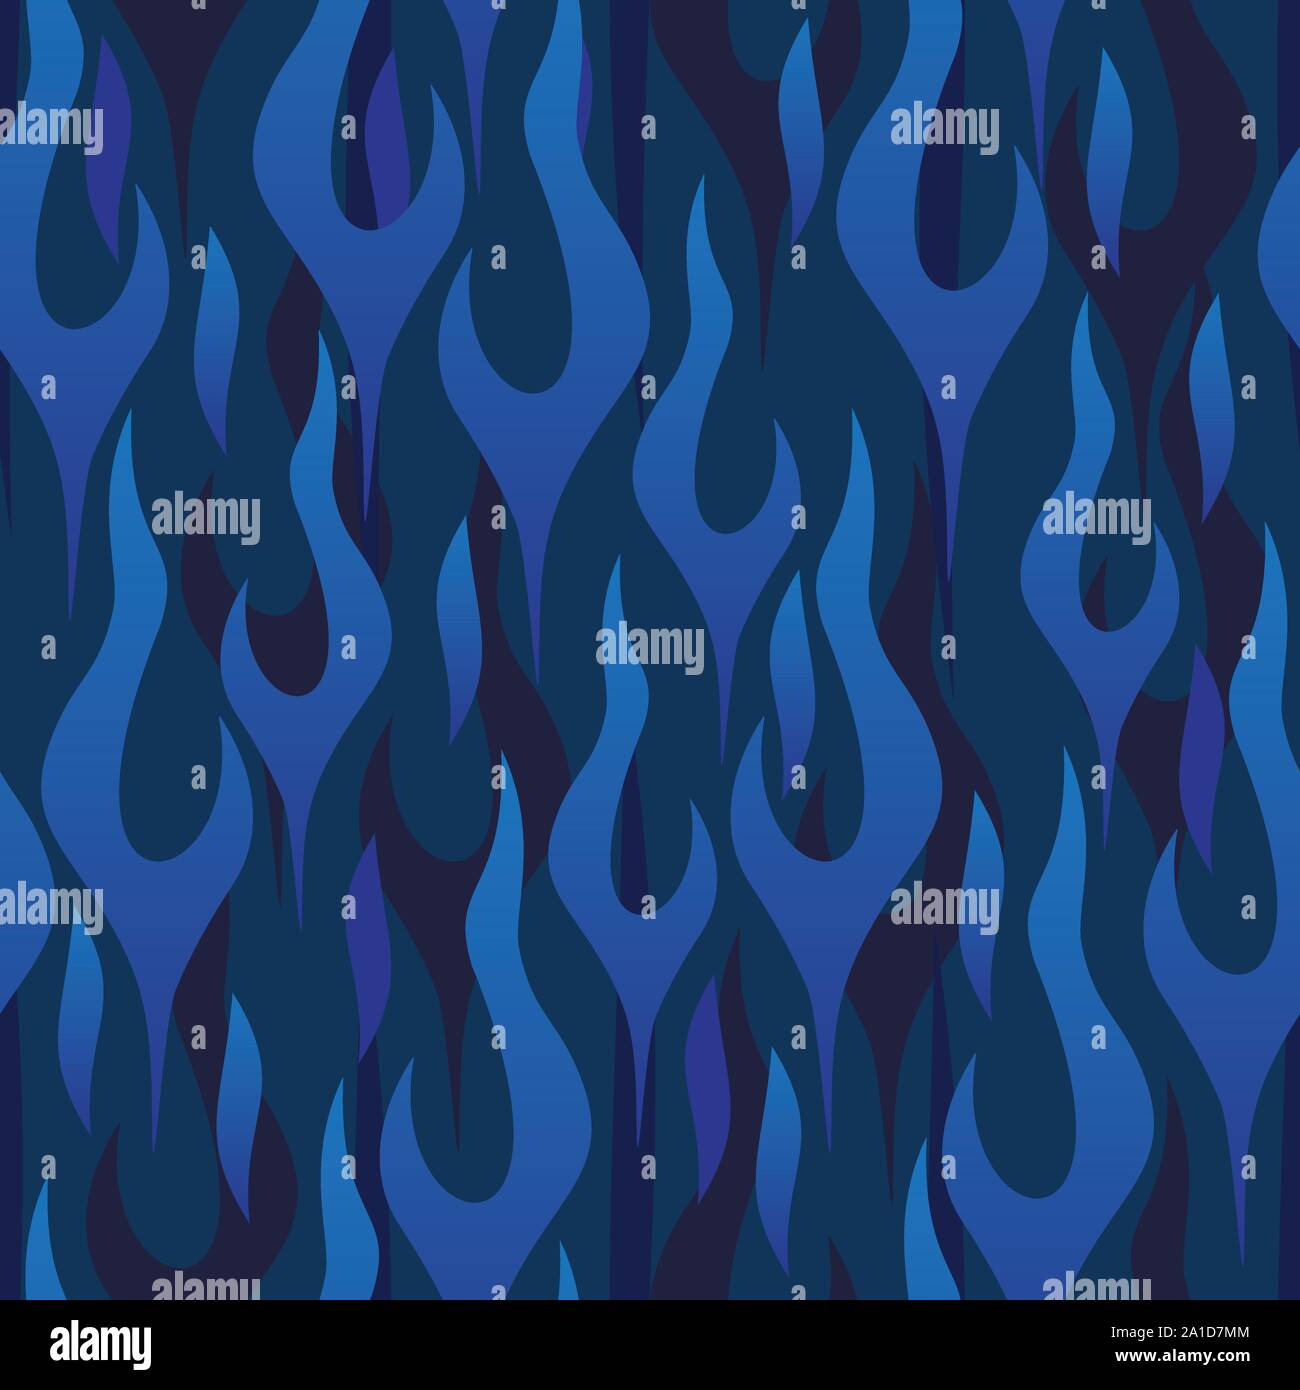 Blue Flames Seamless Repeating Pattern Vector Illustration Stock Vector